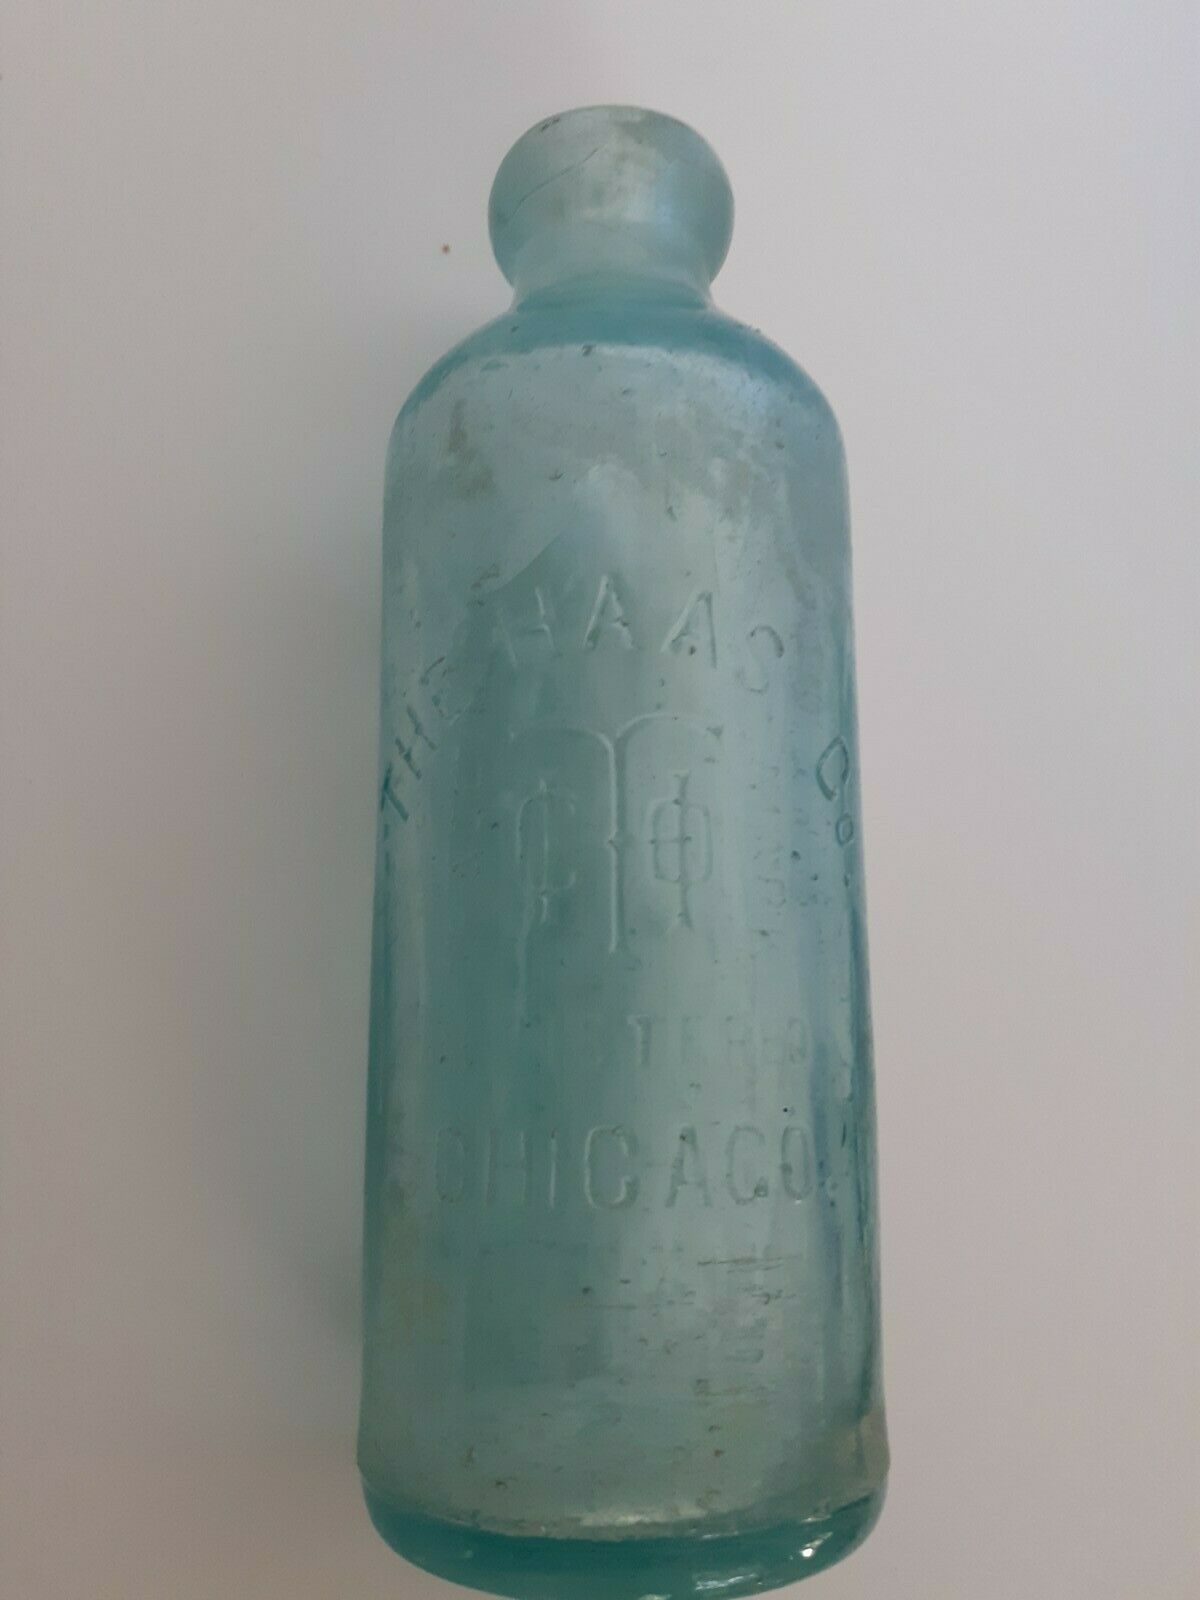 Antique The Haas Co. Chicago, Blob Top Blue Bottle, Dates 1833-1841, Stamped